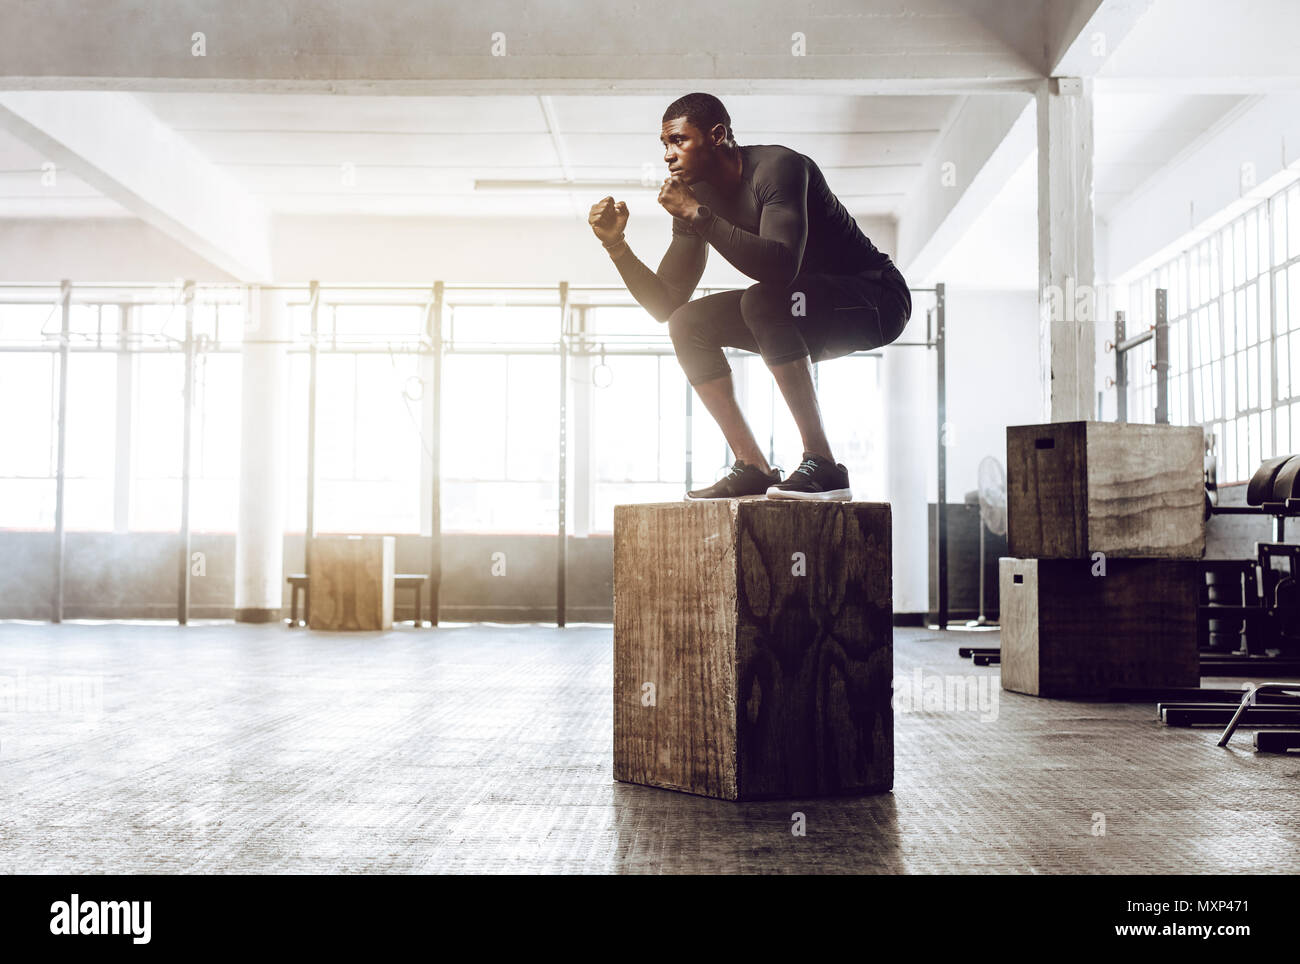 Man doing squats on a squat box at the gym. Crossfit guy at the gym working out standing on a wooden squat box. Stock Photo